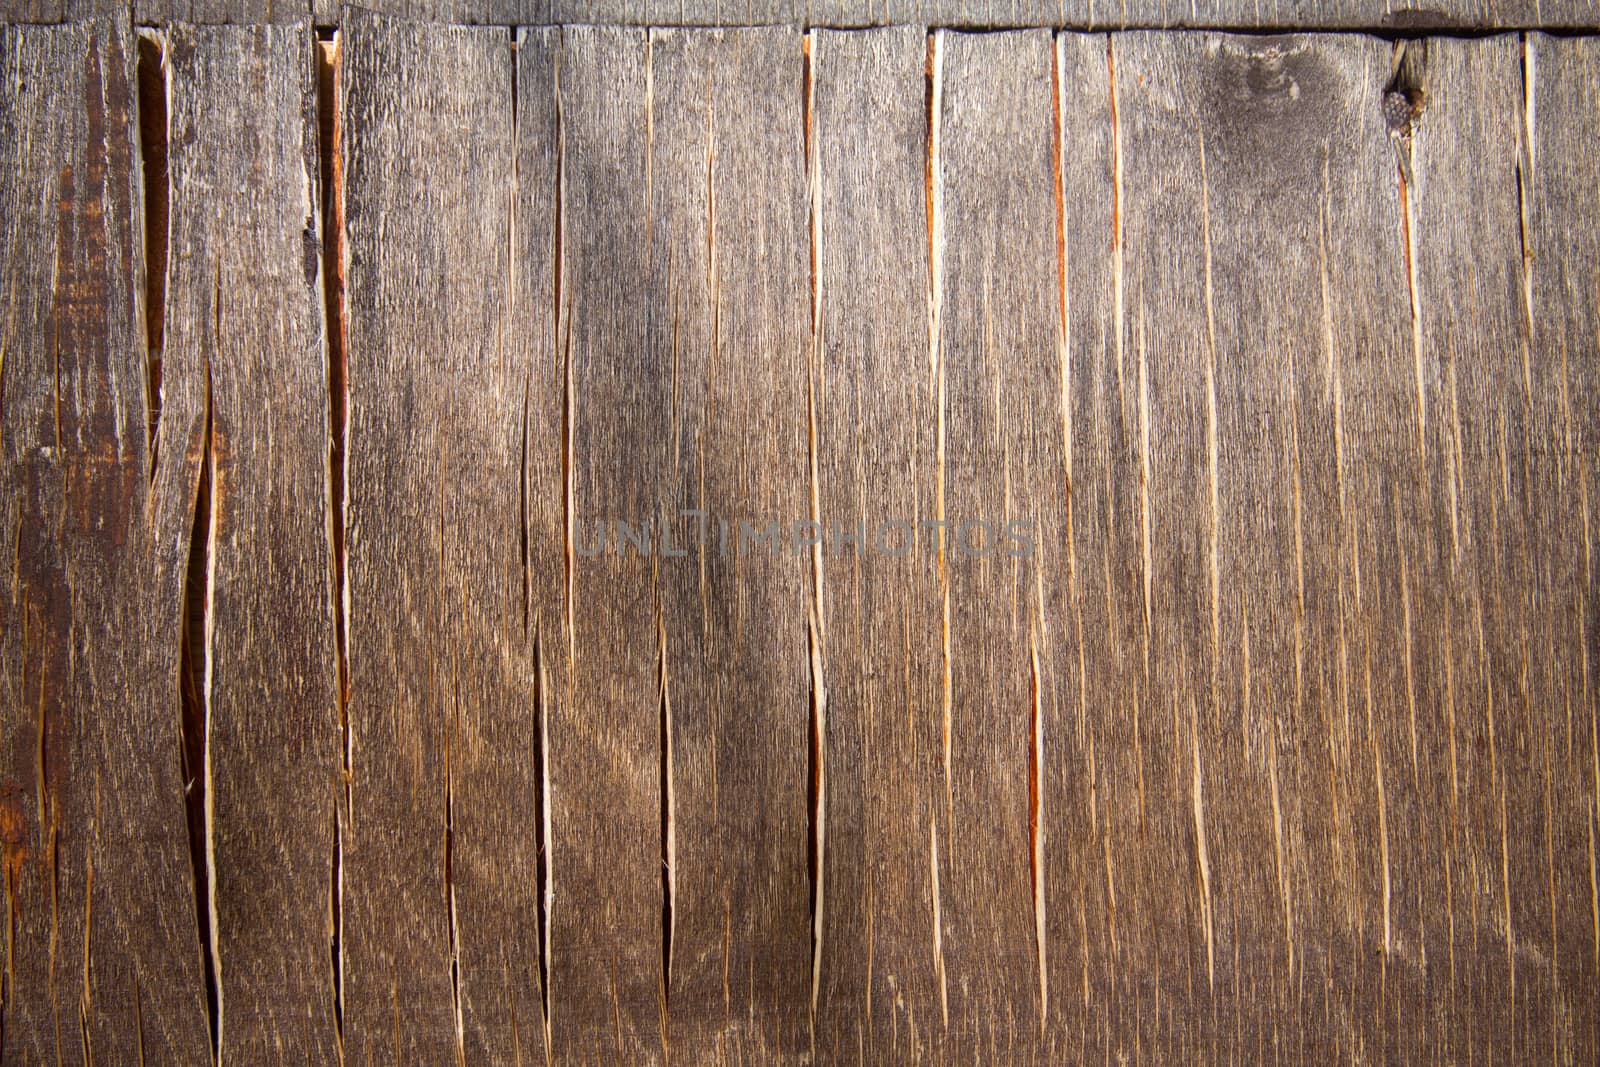 wood texture 6 by max51288